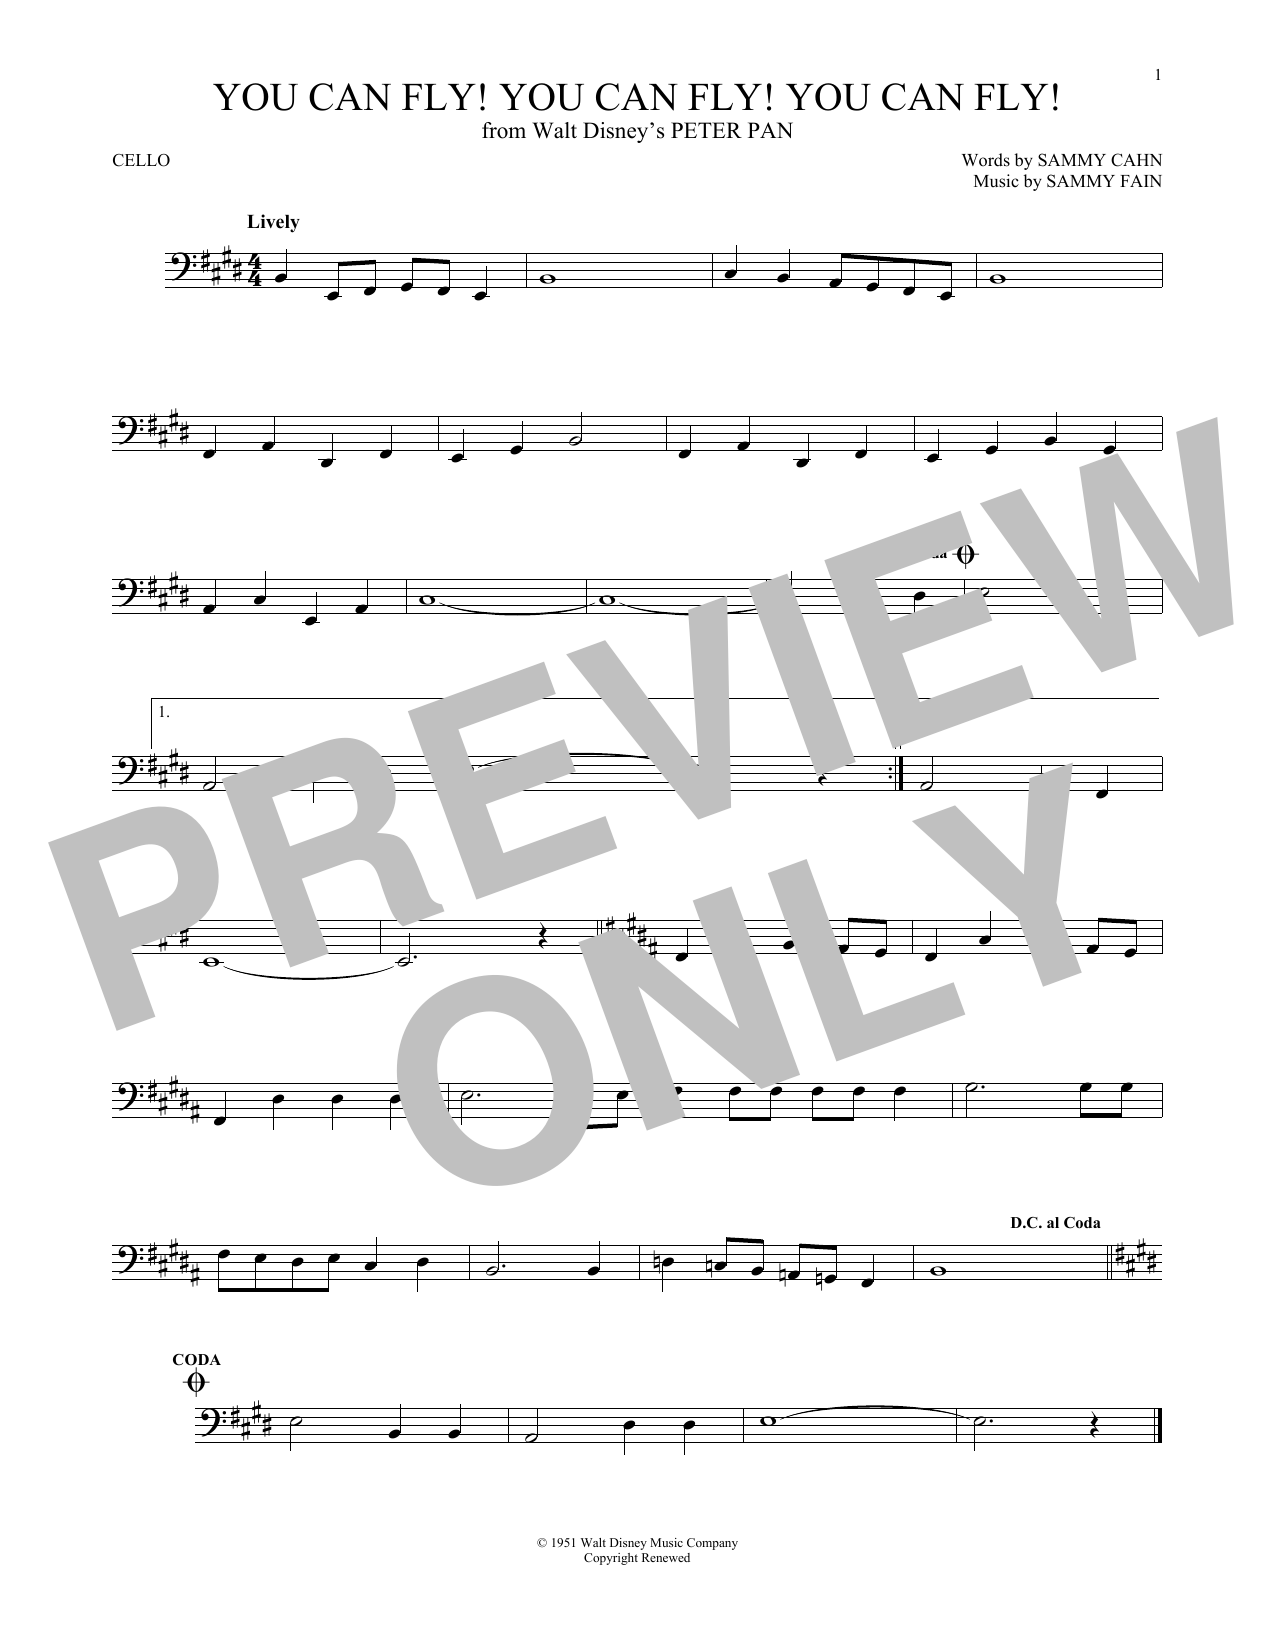 Download Sammy Cahn You Can Fly! You Can Fly! You Can Fly! Sheet Music